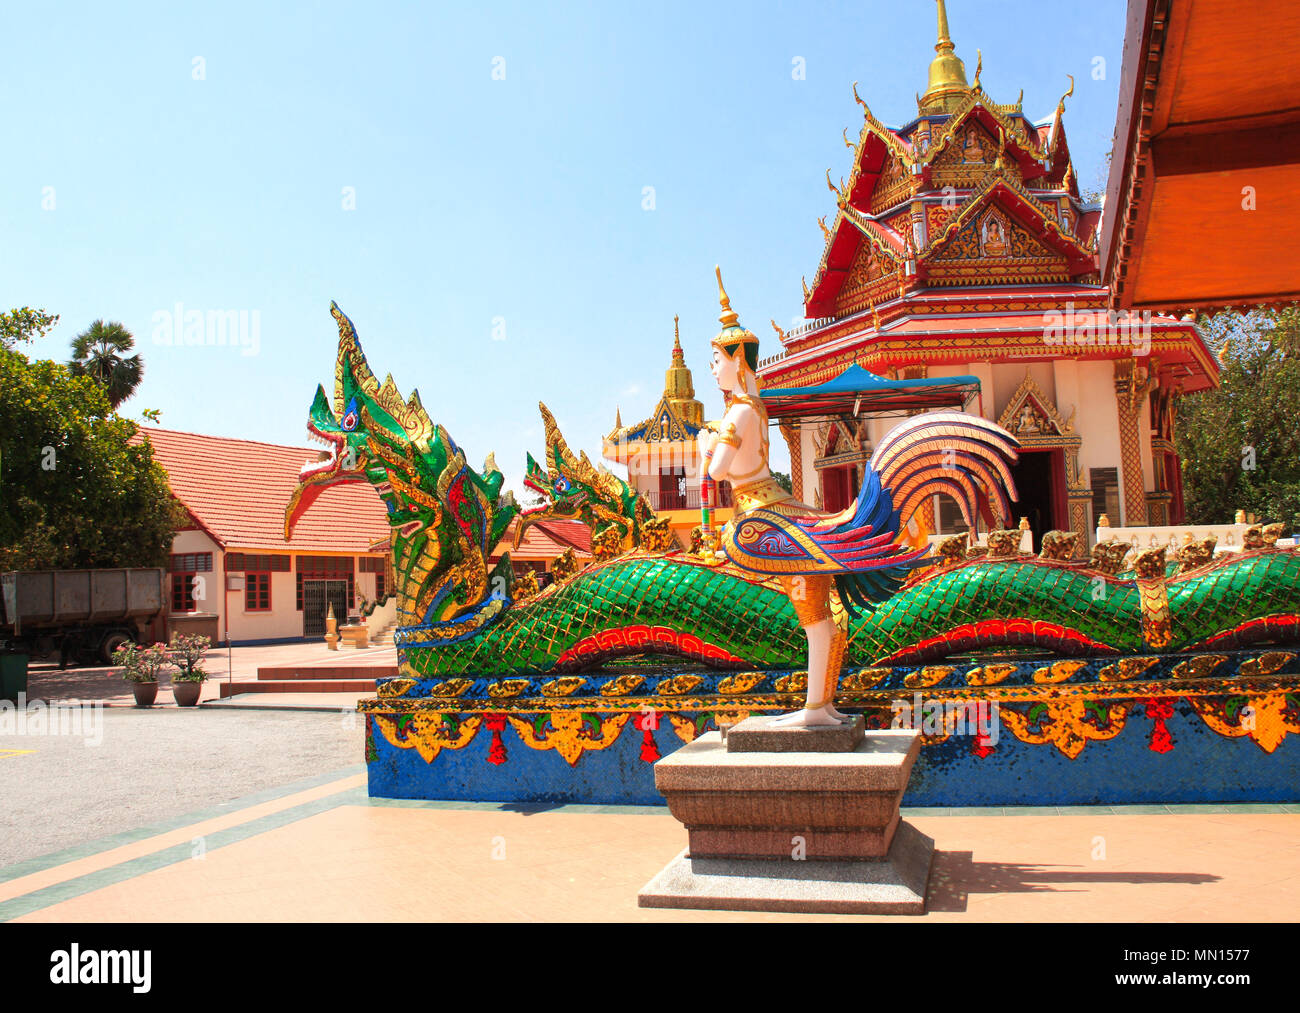 Statues of kinnaris and snakes-nagas Pavilion in Pulau Tikus, thai Buddhist temple (Wat Chayamangkalaram), famous tourist attraction in Georgetown, Pe Stock Photo